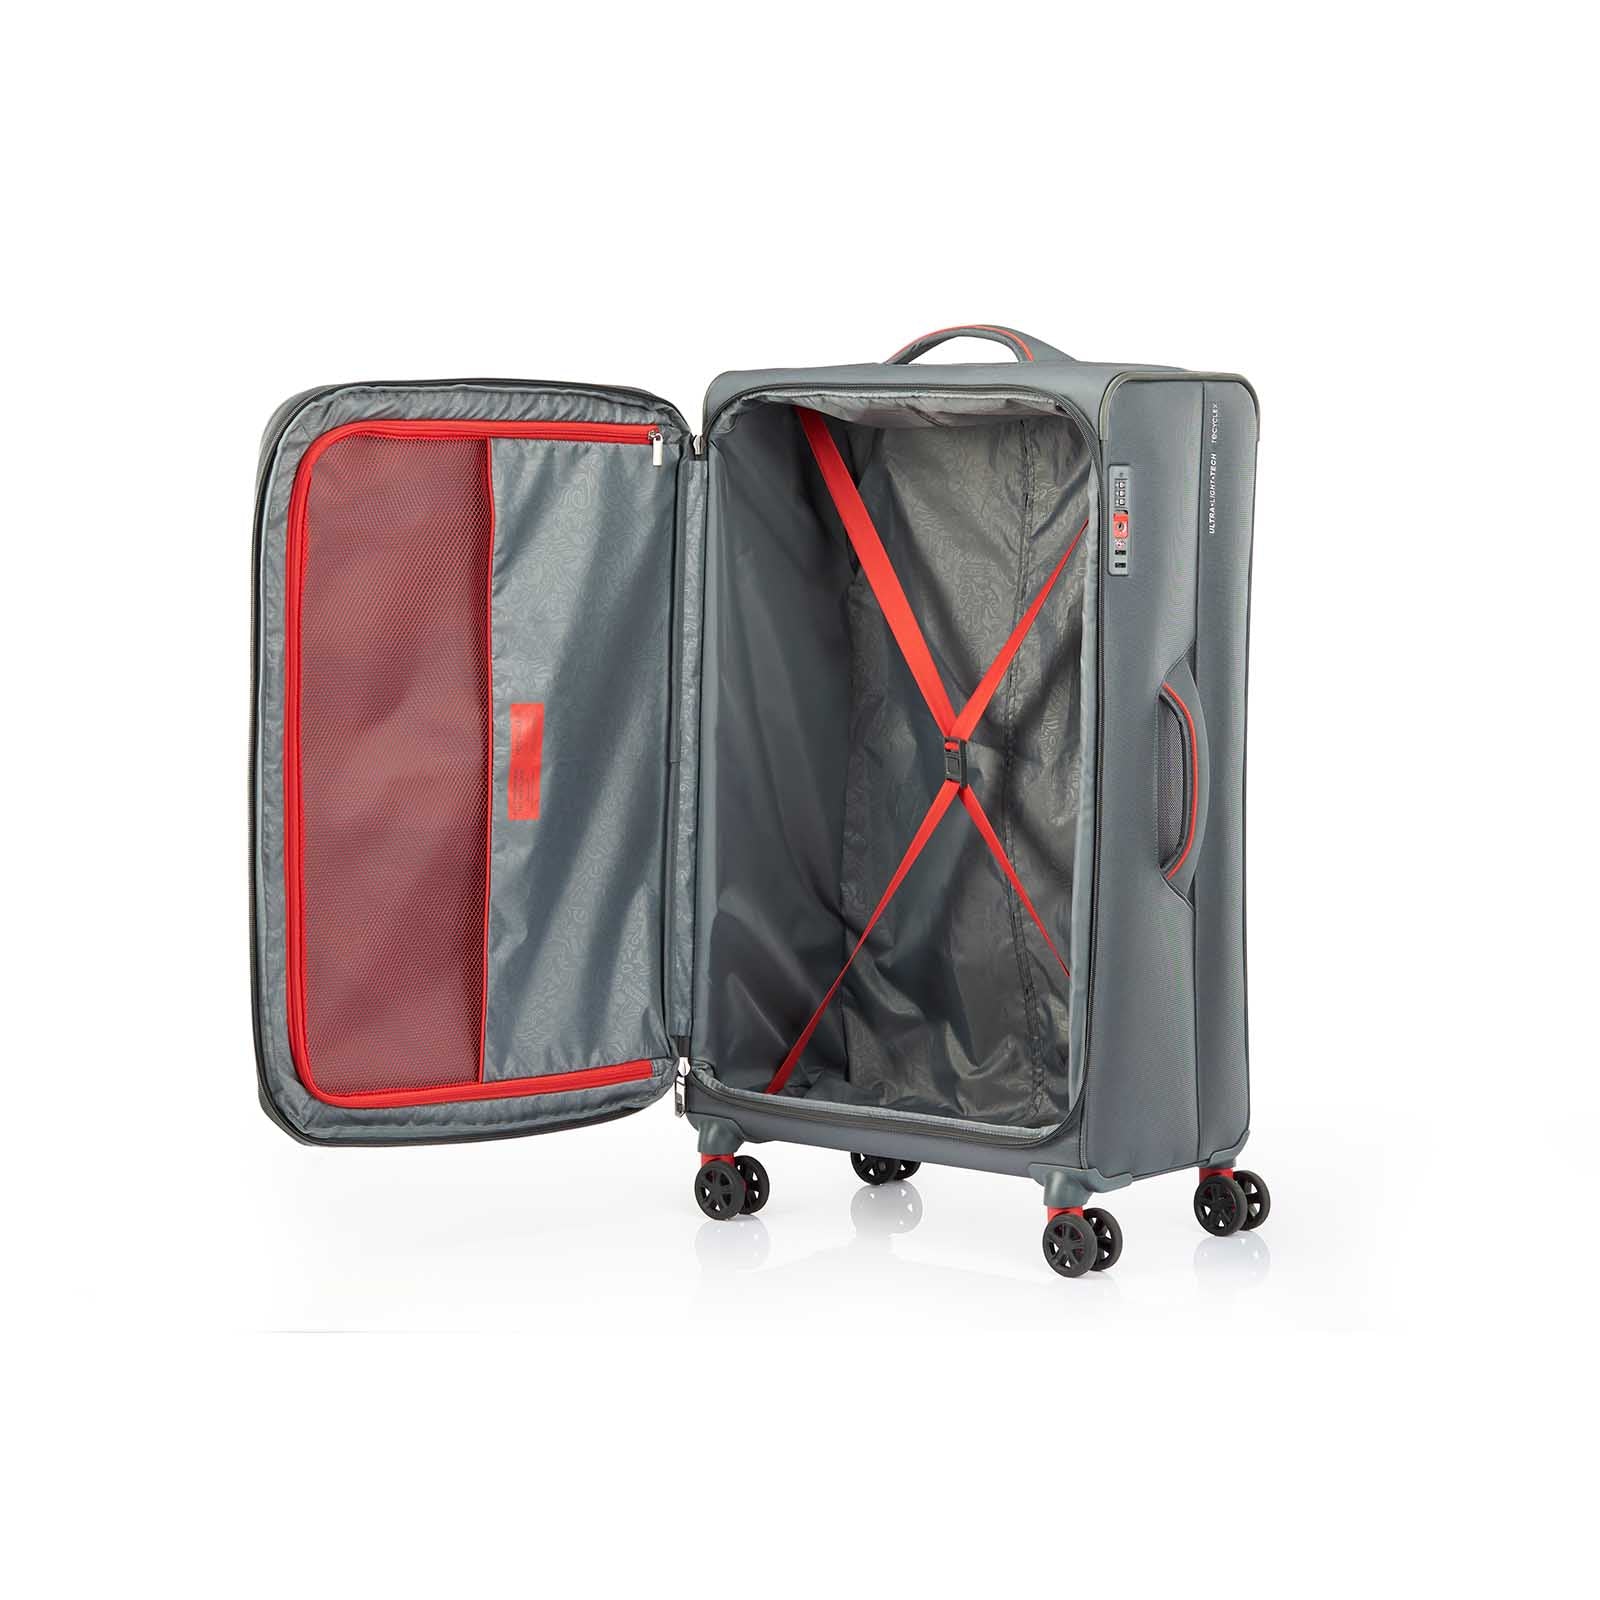 American-Tourister-Applite-4-Eco-82cm-Suitcase-Grey-Red-Open